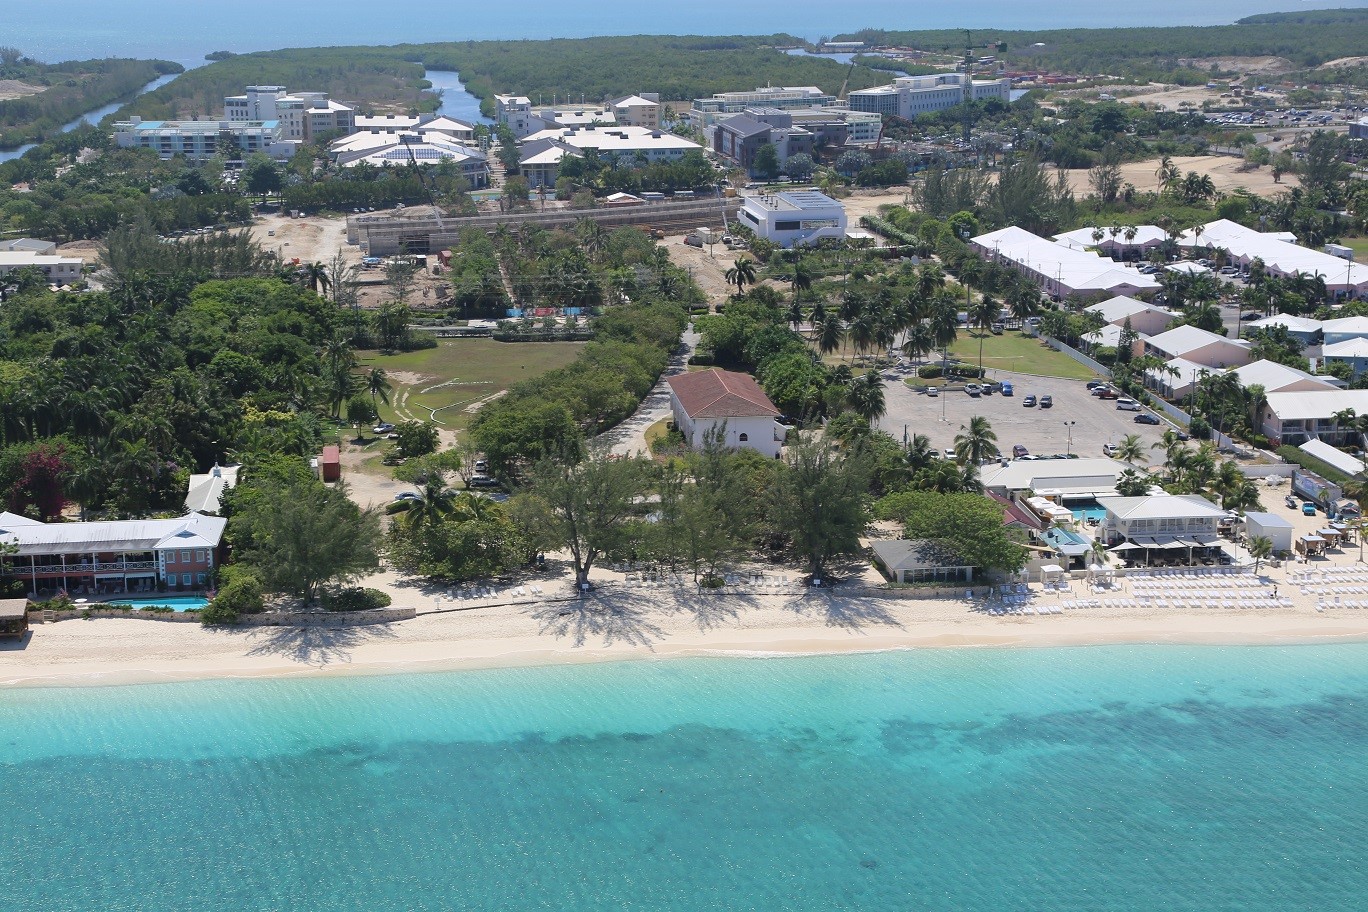 Media Release: Dart Real Estate Acquires Beachfront Property Adjacent to Camana Bay